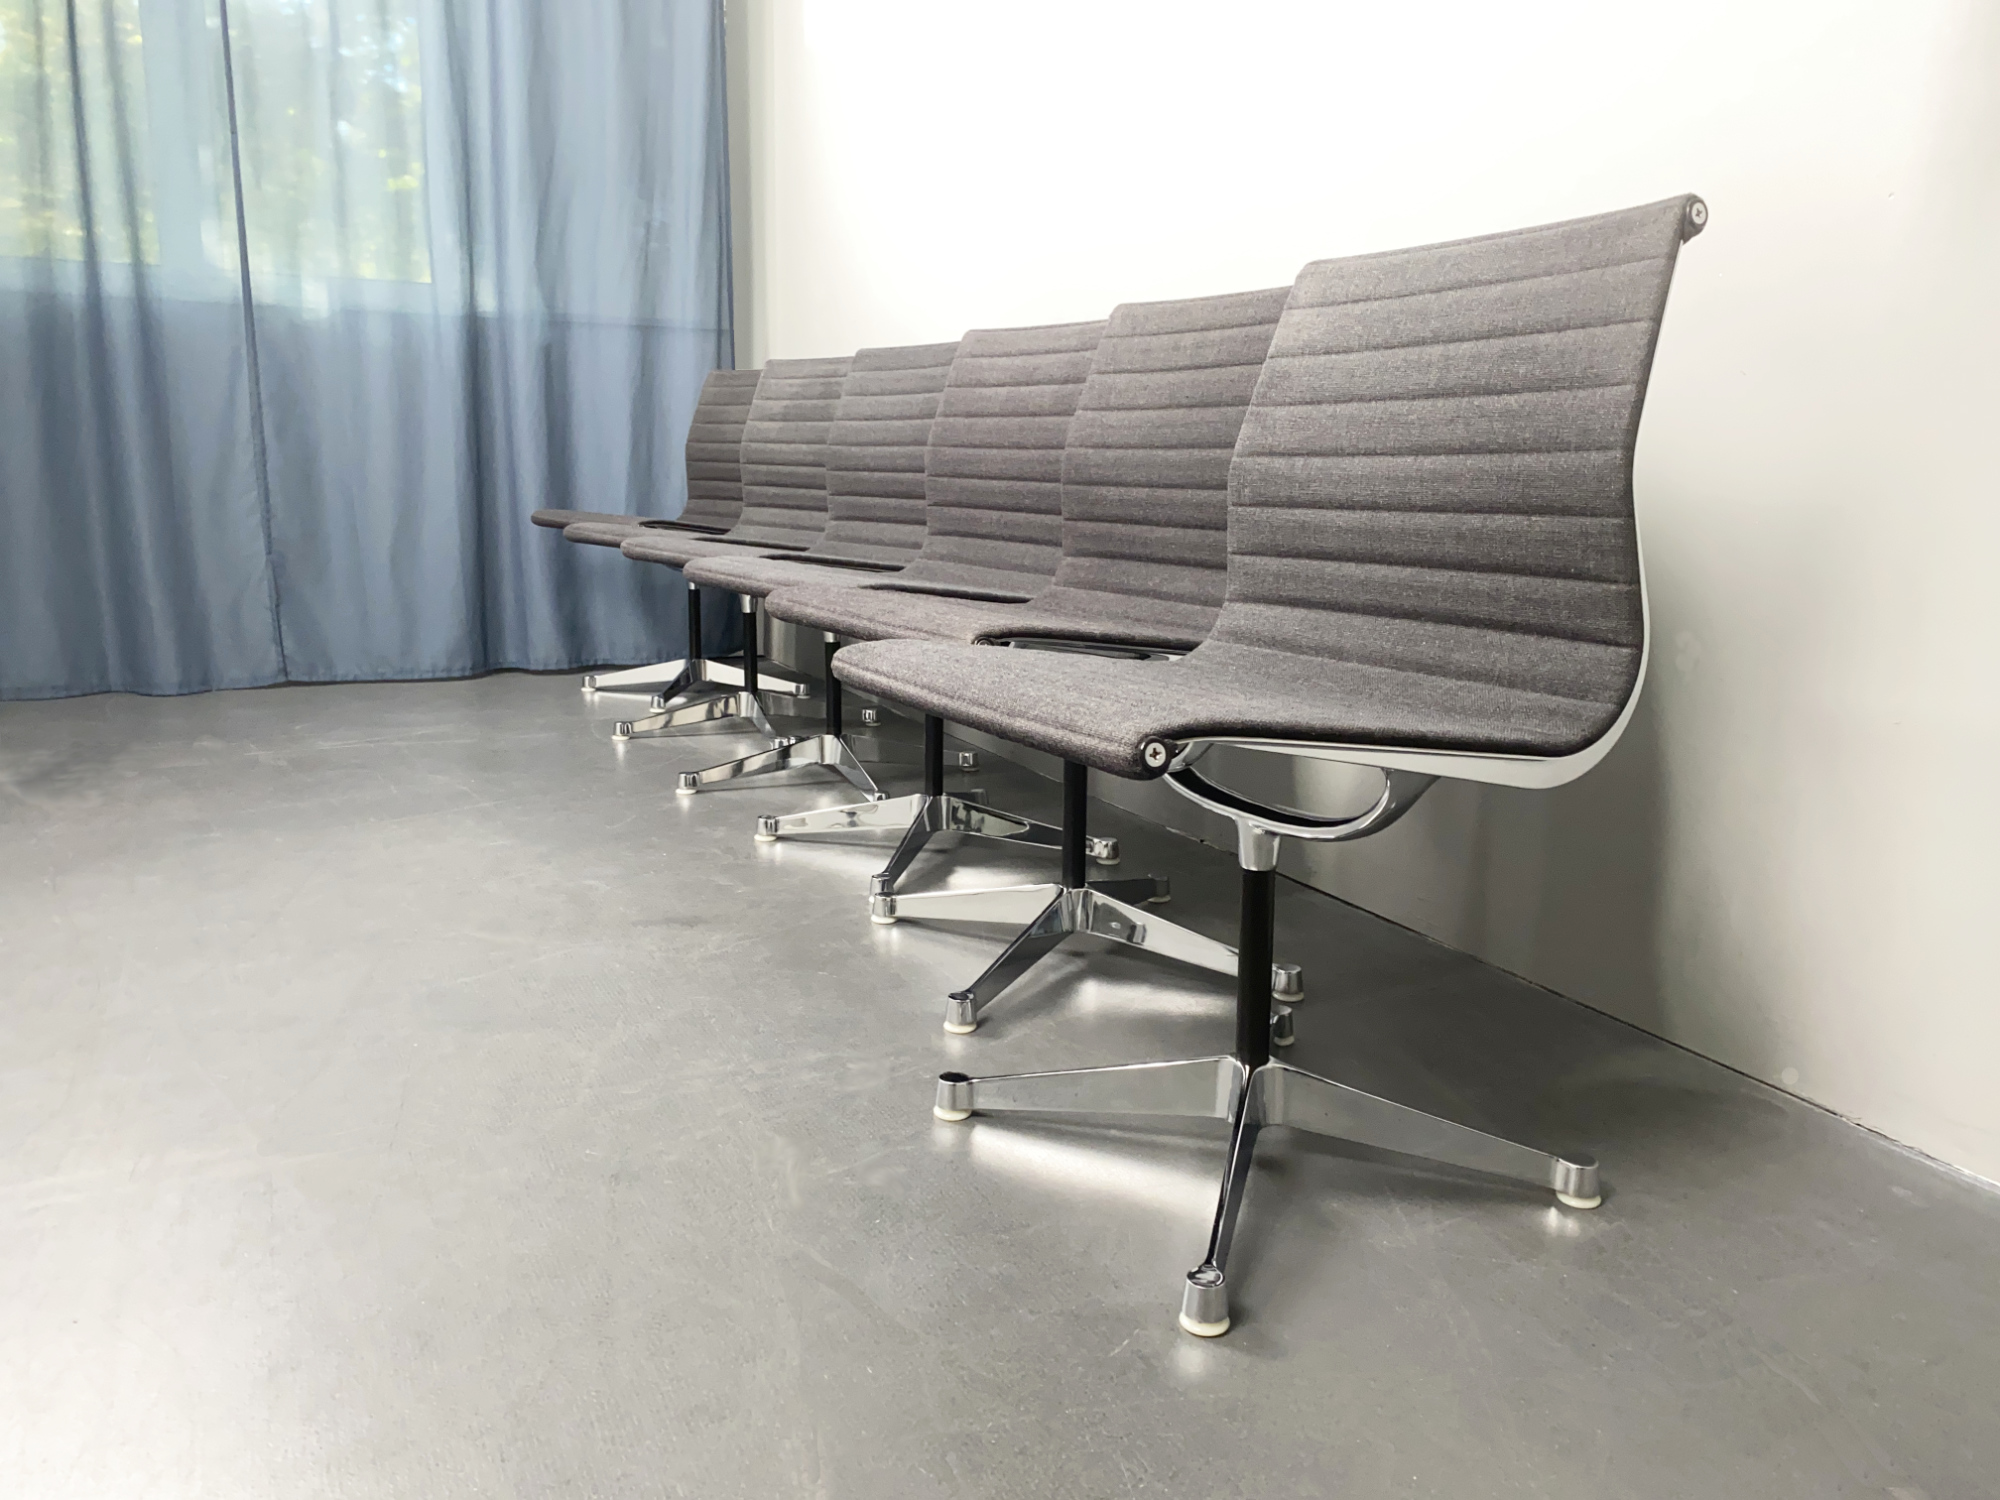 Set of 6 gray mottled Aluminum Swivel-Chair / Desk-Chair / Office-Chair EA 107 by Charles & Ray Eames for Herman Miller by Vitra, Germany, 1970s